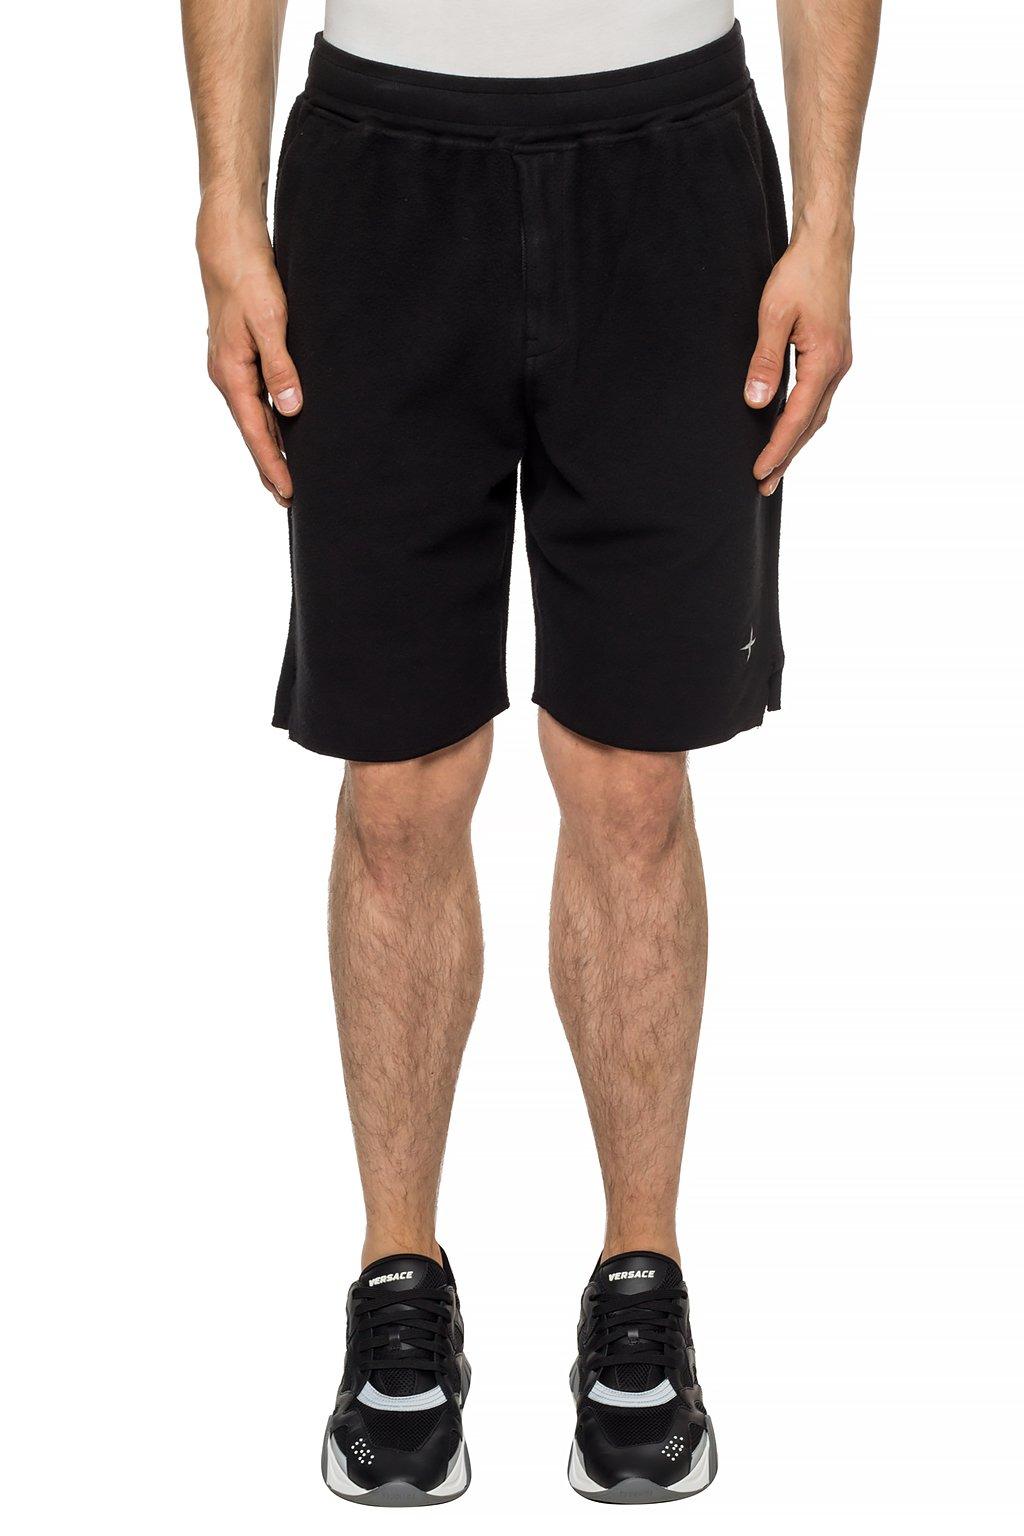 Stone Island Cotton Branded Sweat Shorts in Black for Men - Lyst